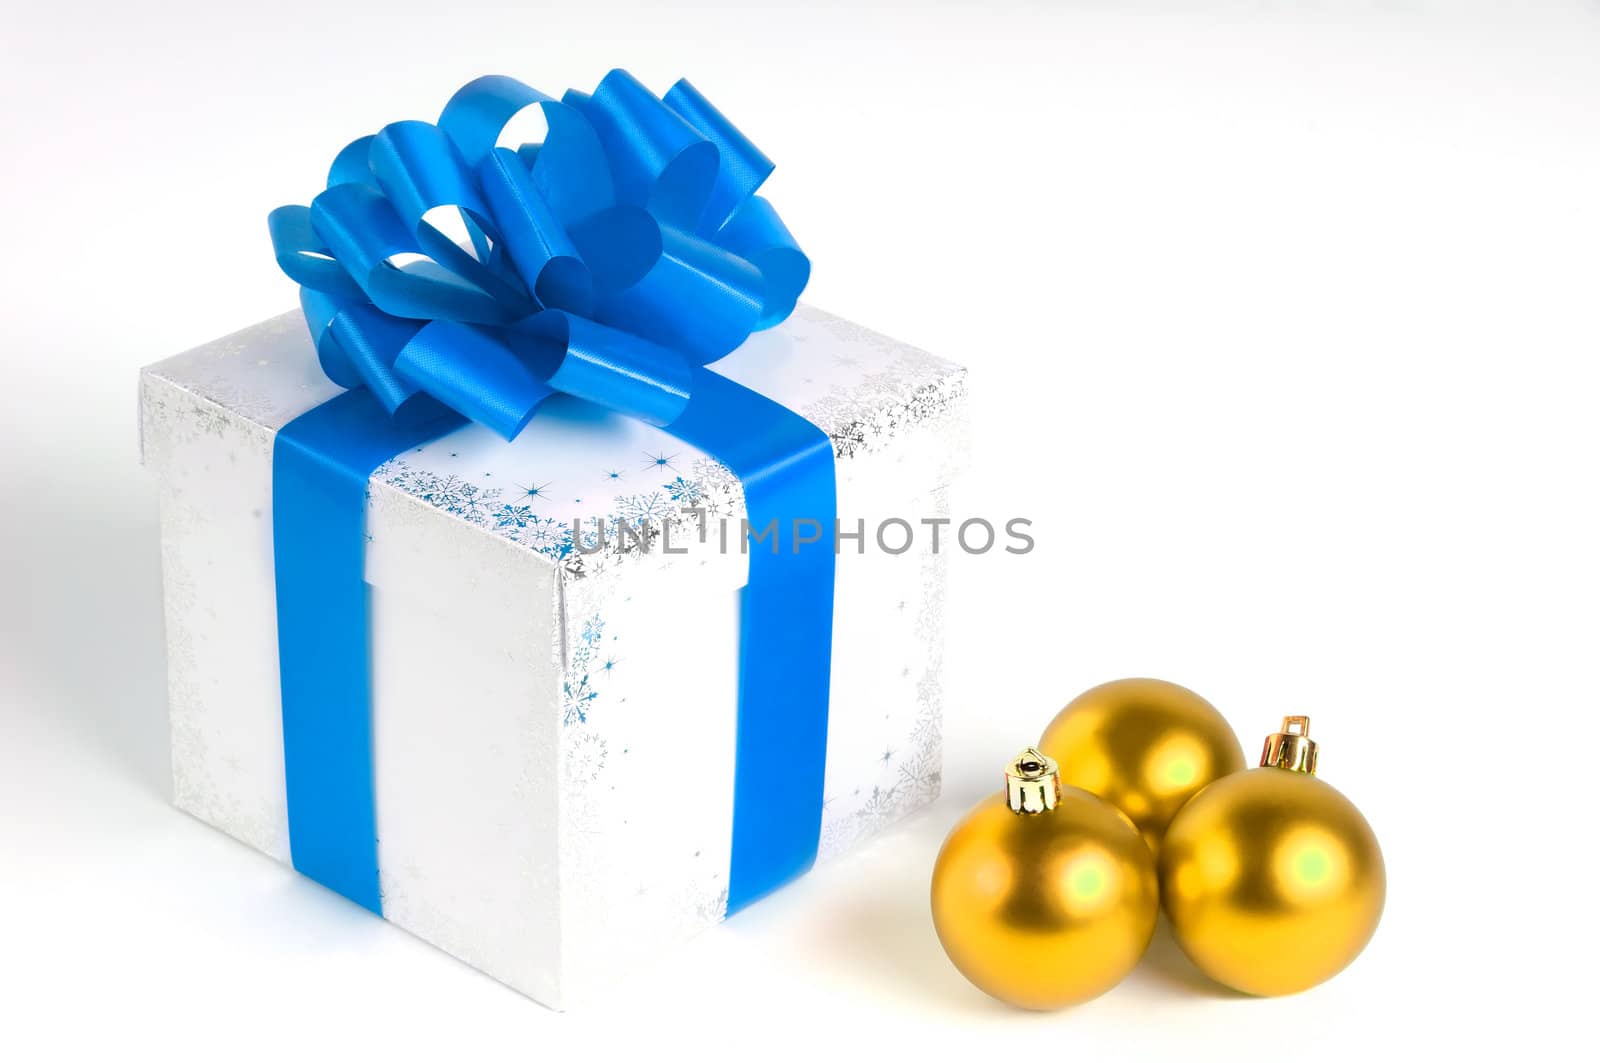 New year gift box isolated on white with Christmas balls, blue and golden